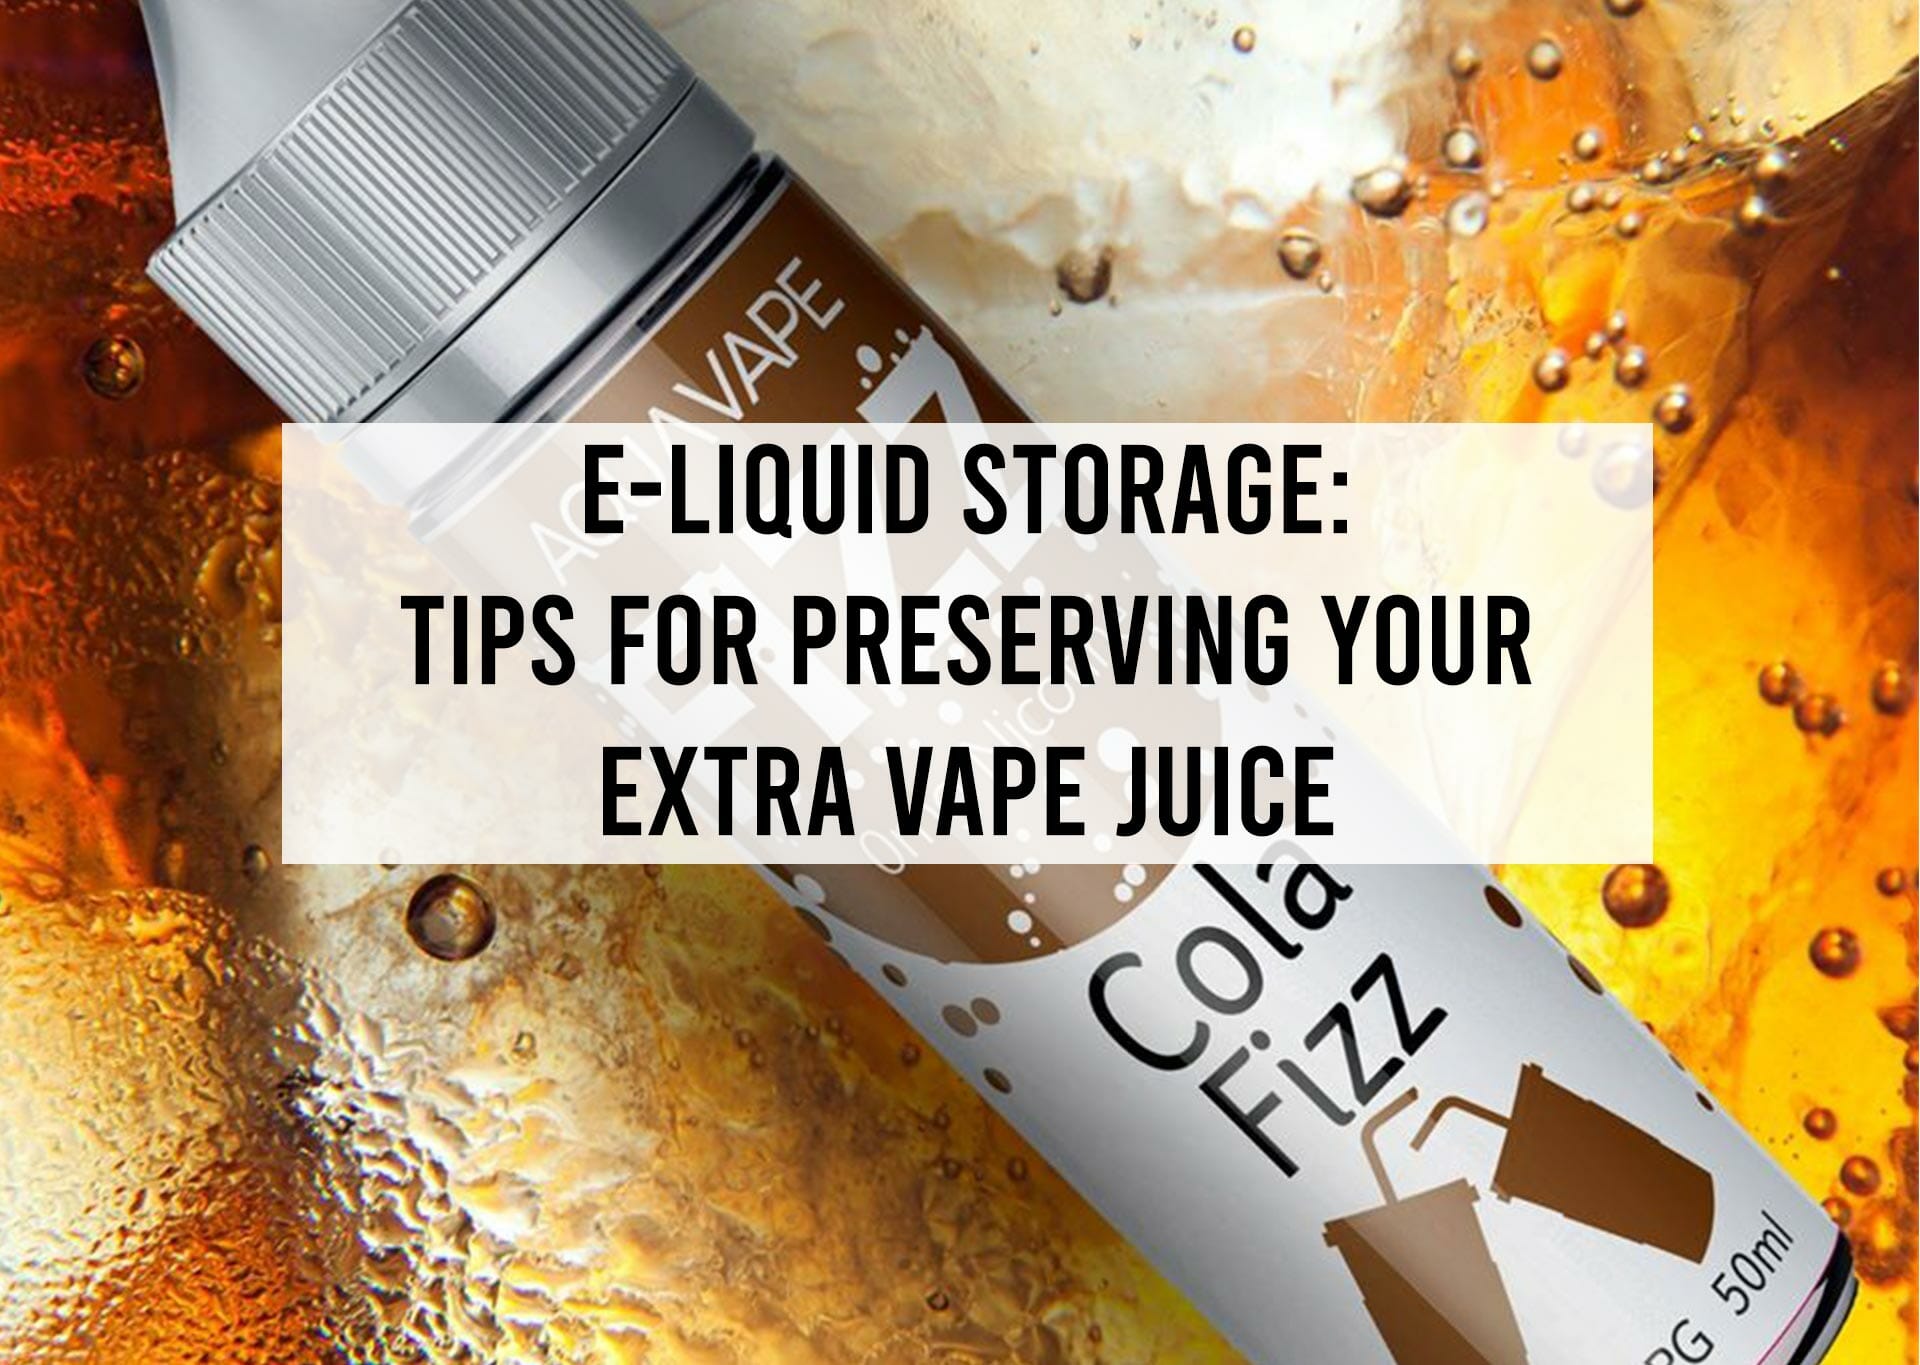 How to Store E-Liquid? – What Should You Know About E-Juice Storage?